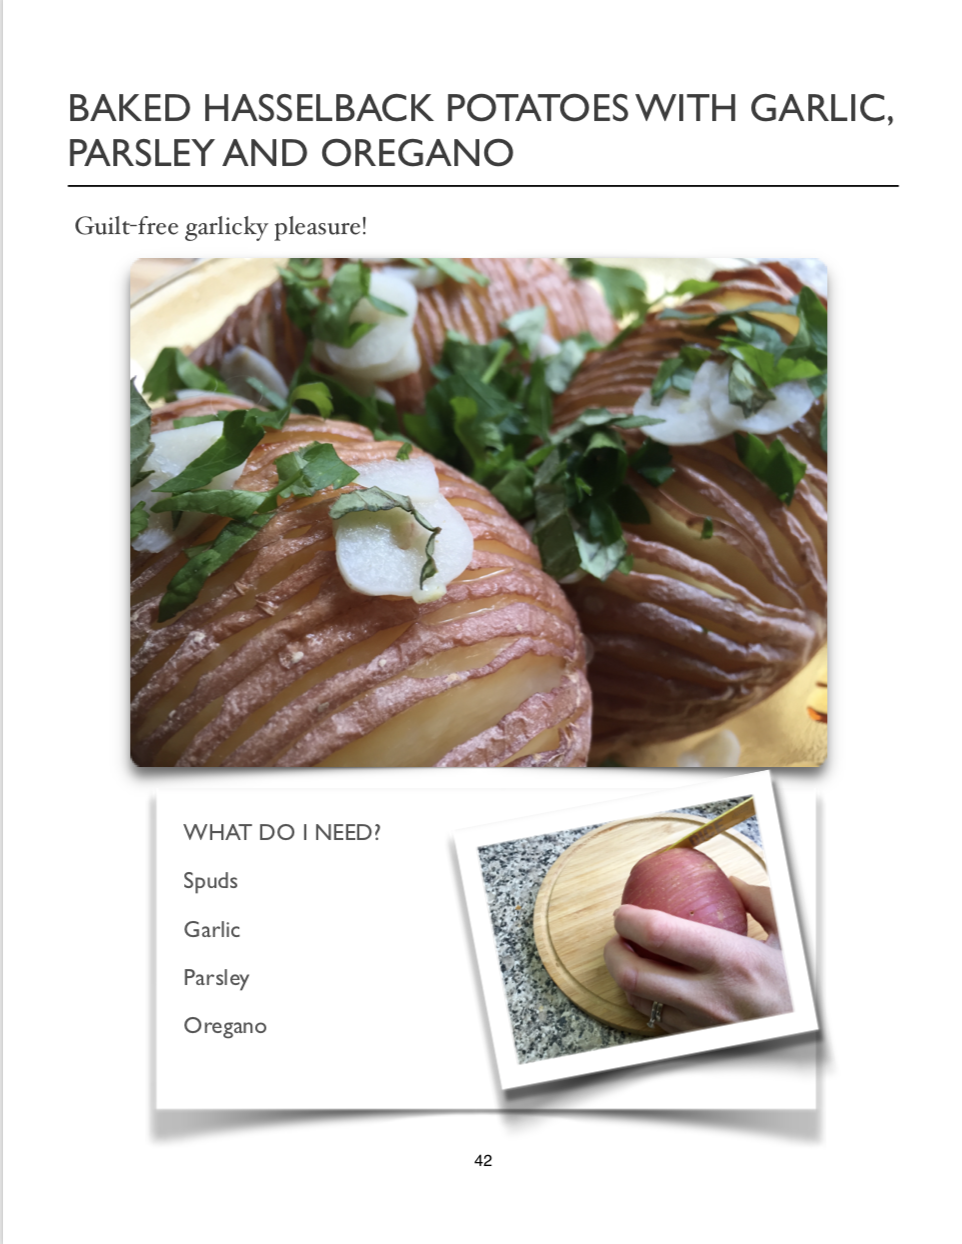 Baked Hasselback Potatoes with Garlic, Parsley